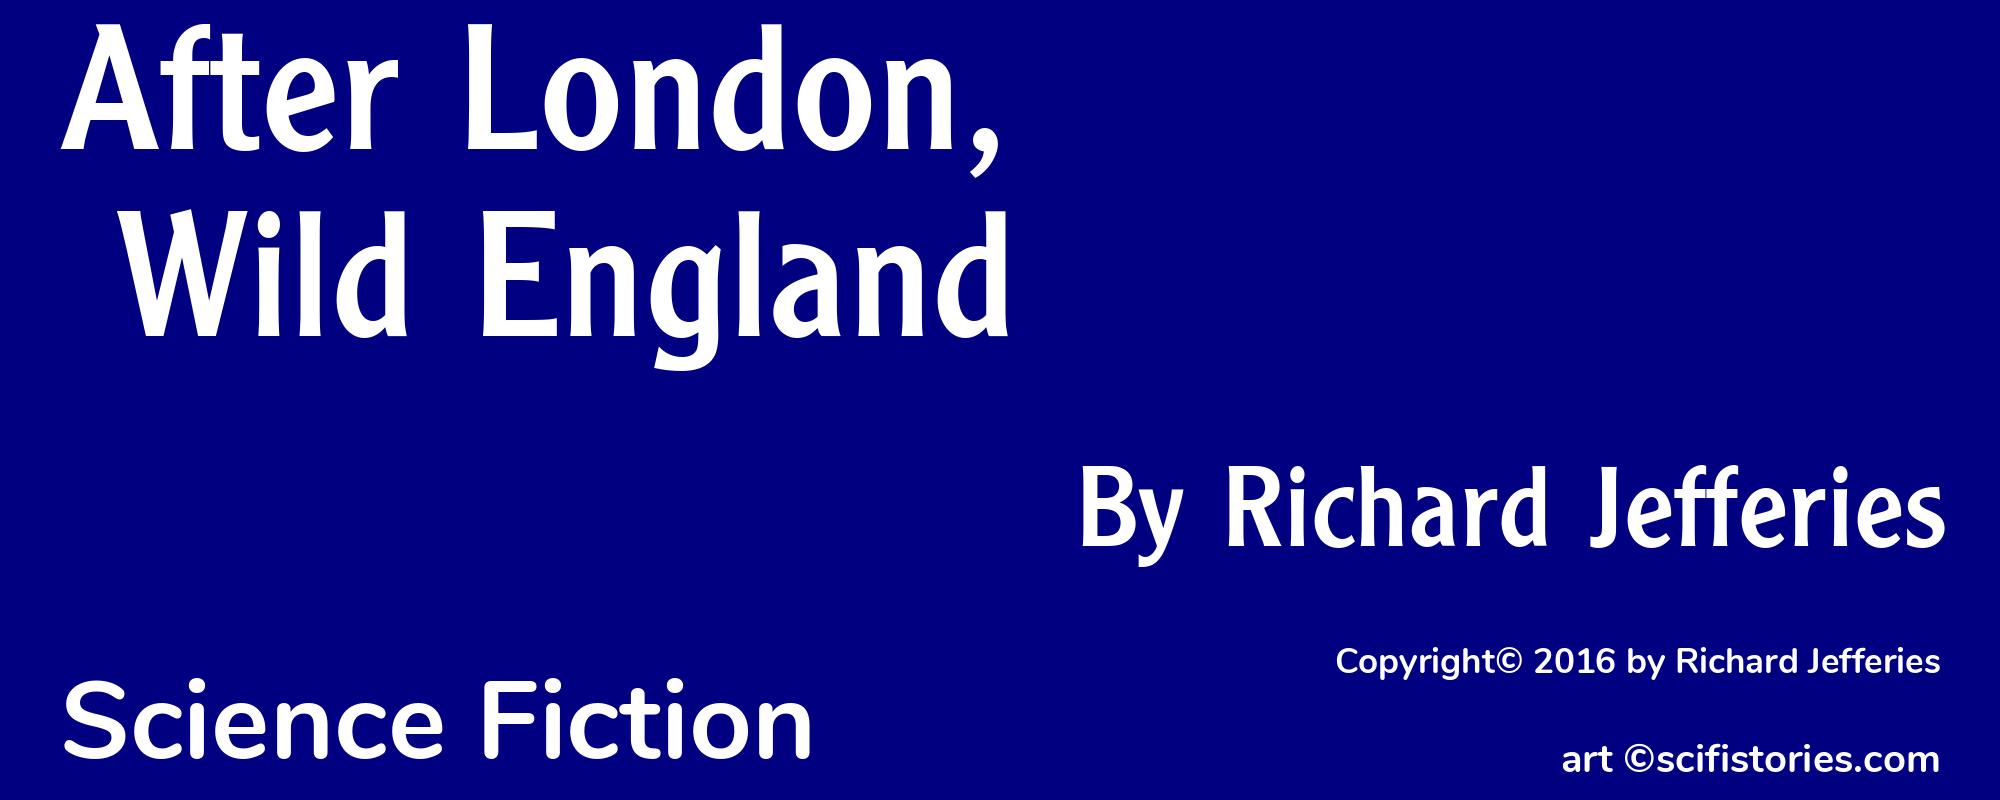 After London, Wild England - Cover